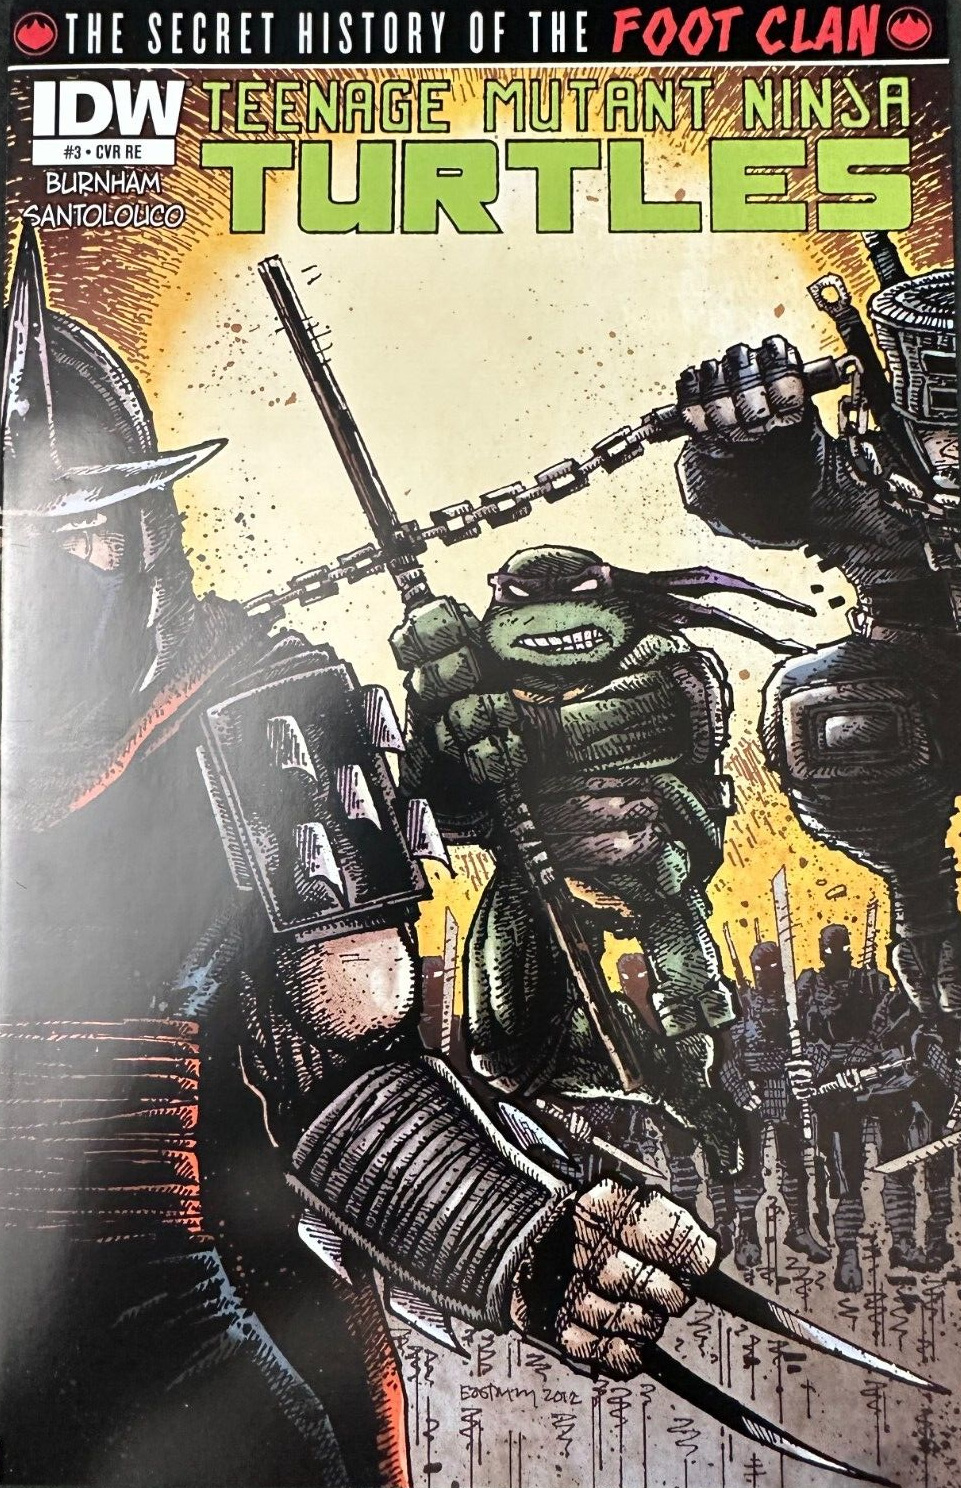 TMNT History of the Foot Clan #3 Jetpack Exclusive